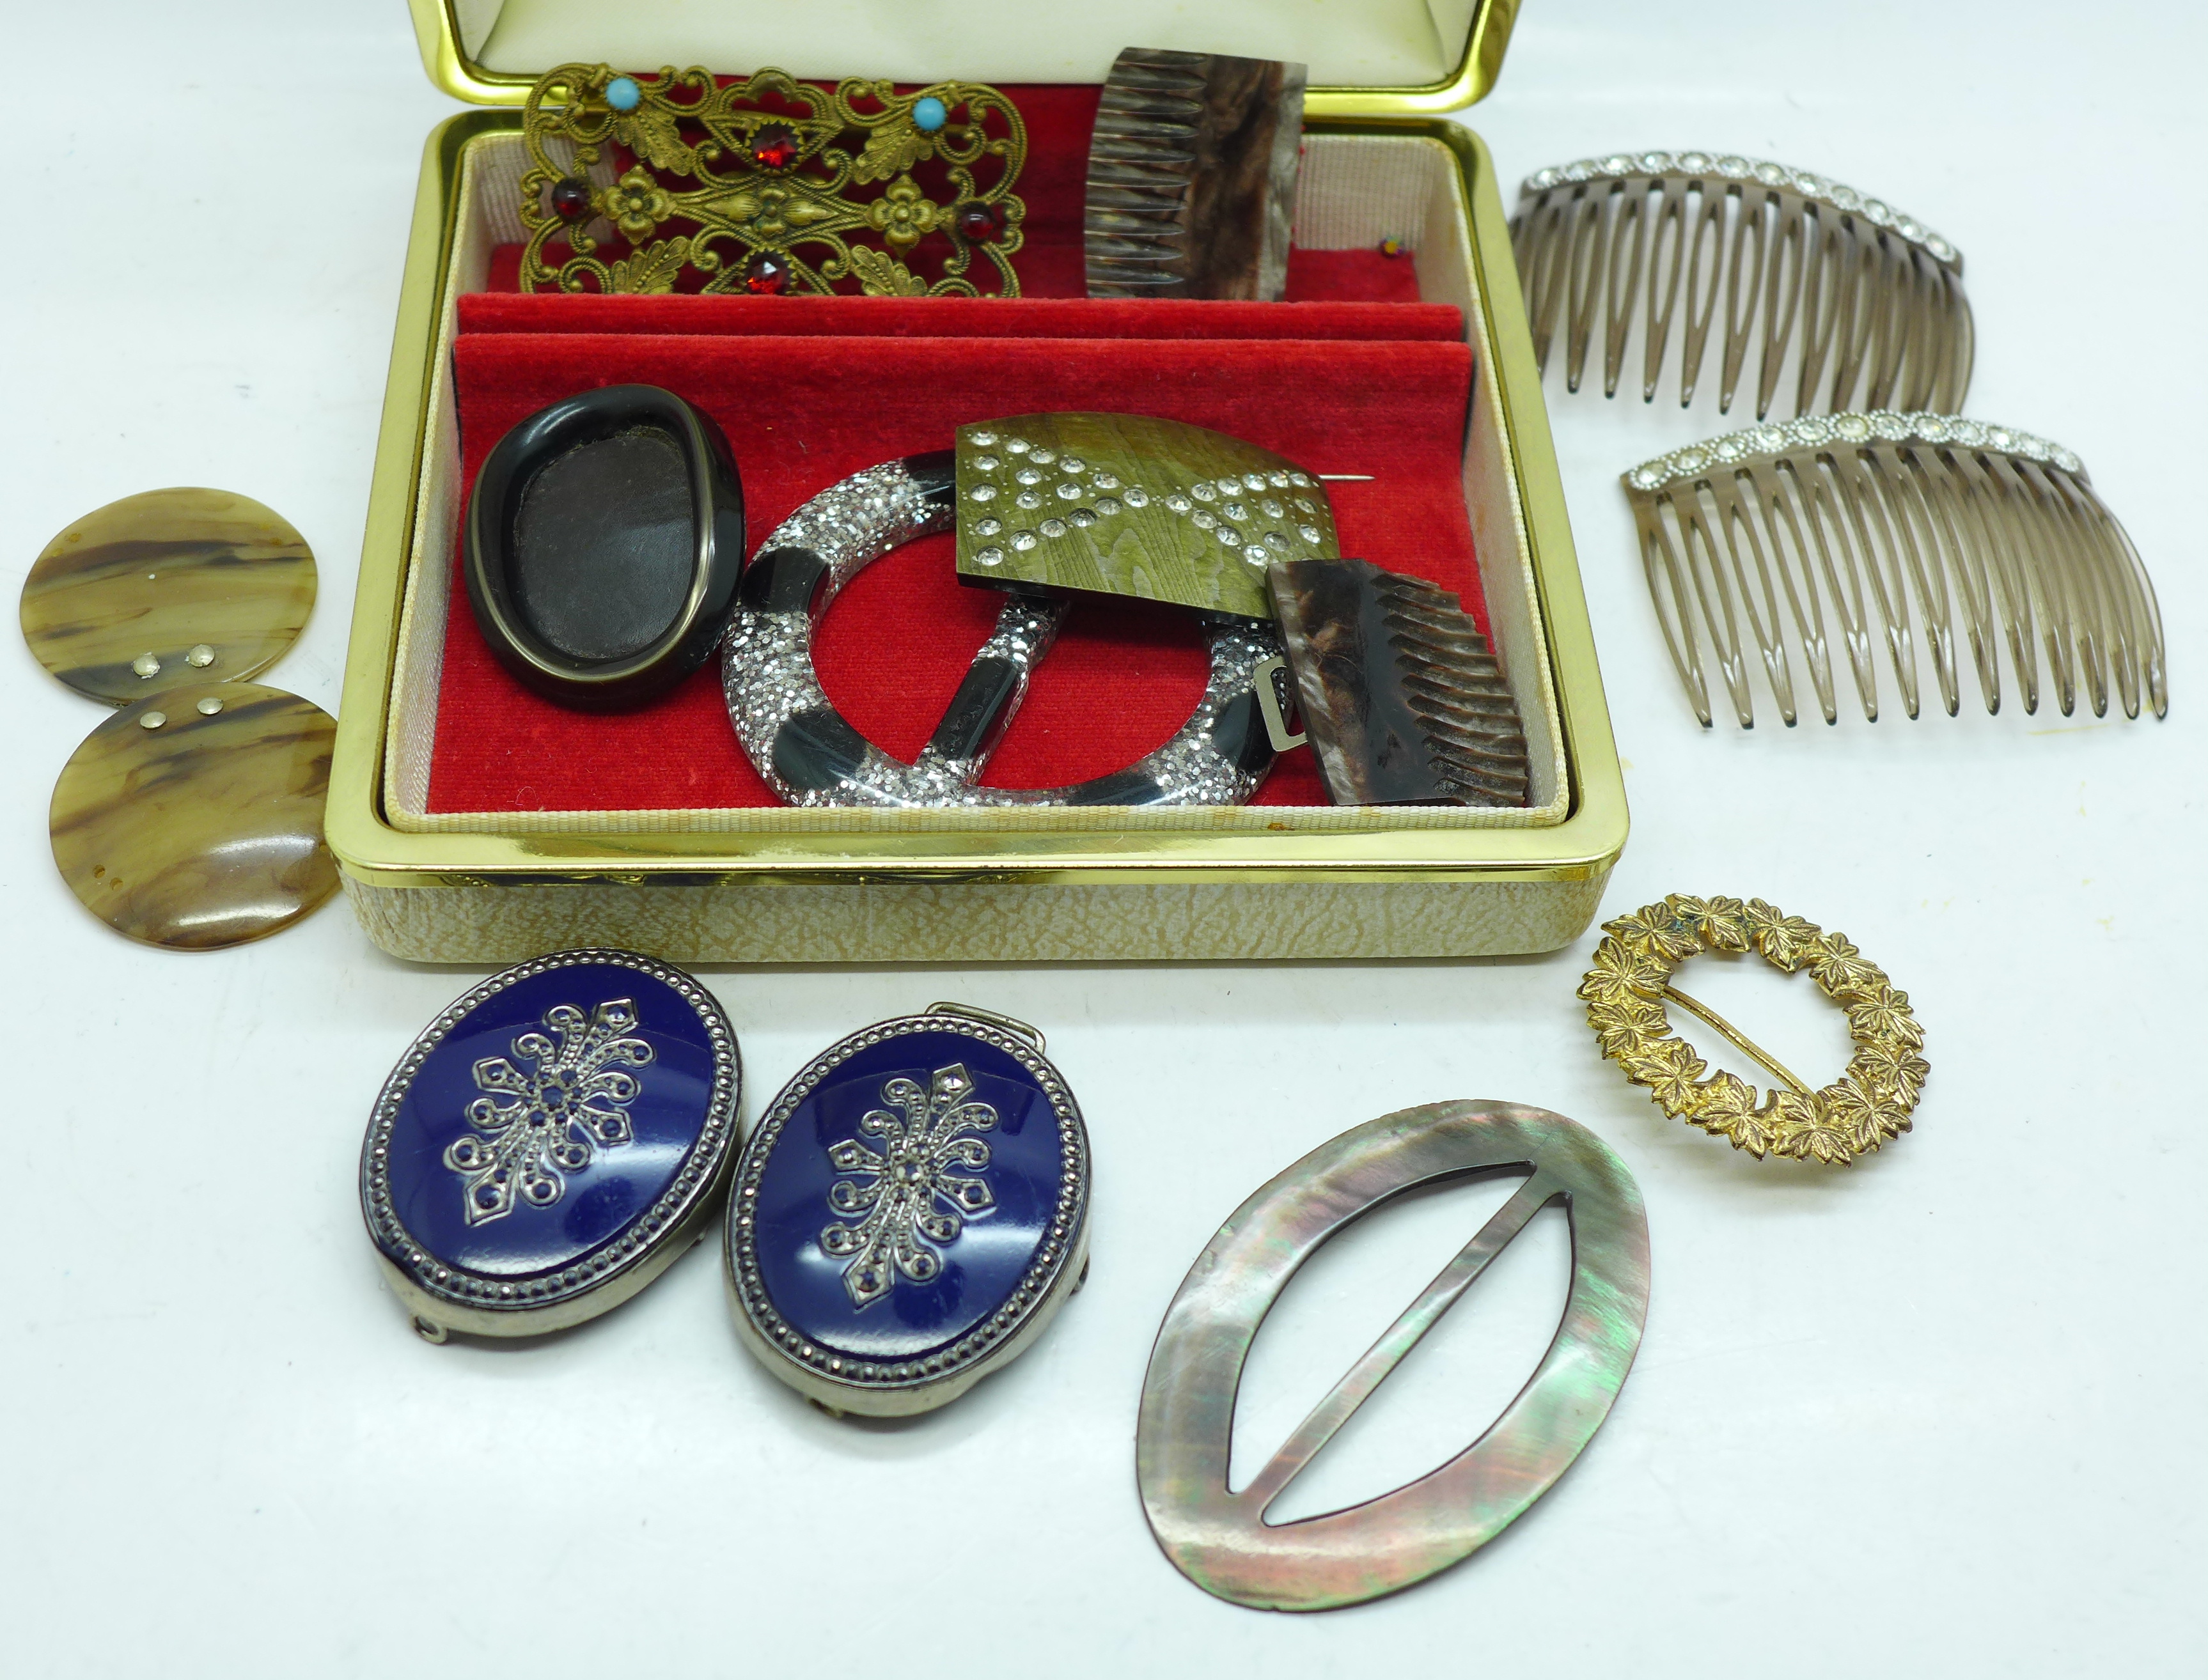 Buckles including mother of pearl and two hairslides